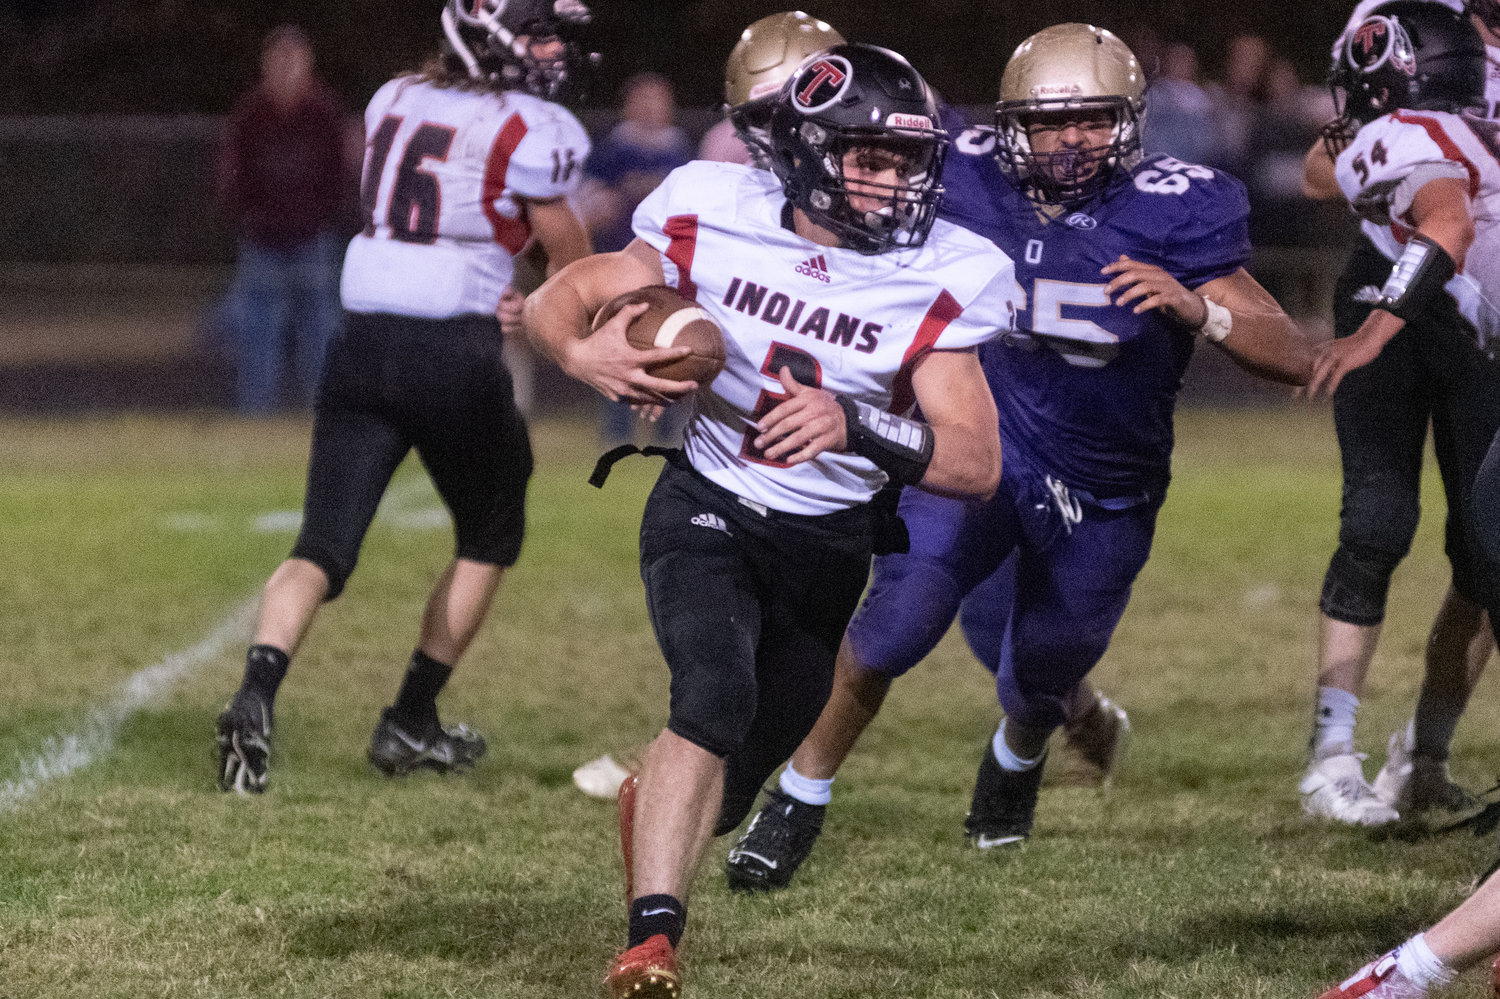 Justin Filla looks for some room to cut upfield in Toledo's 36-6 loss to Onalaska Oct. 1